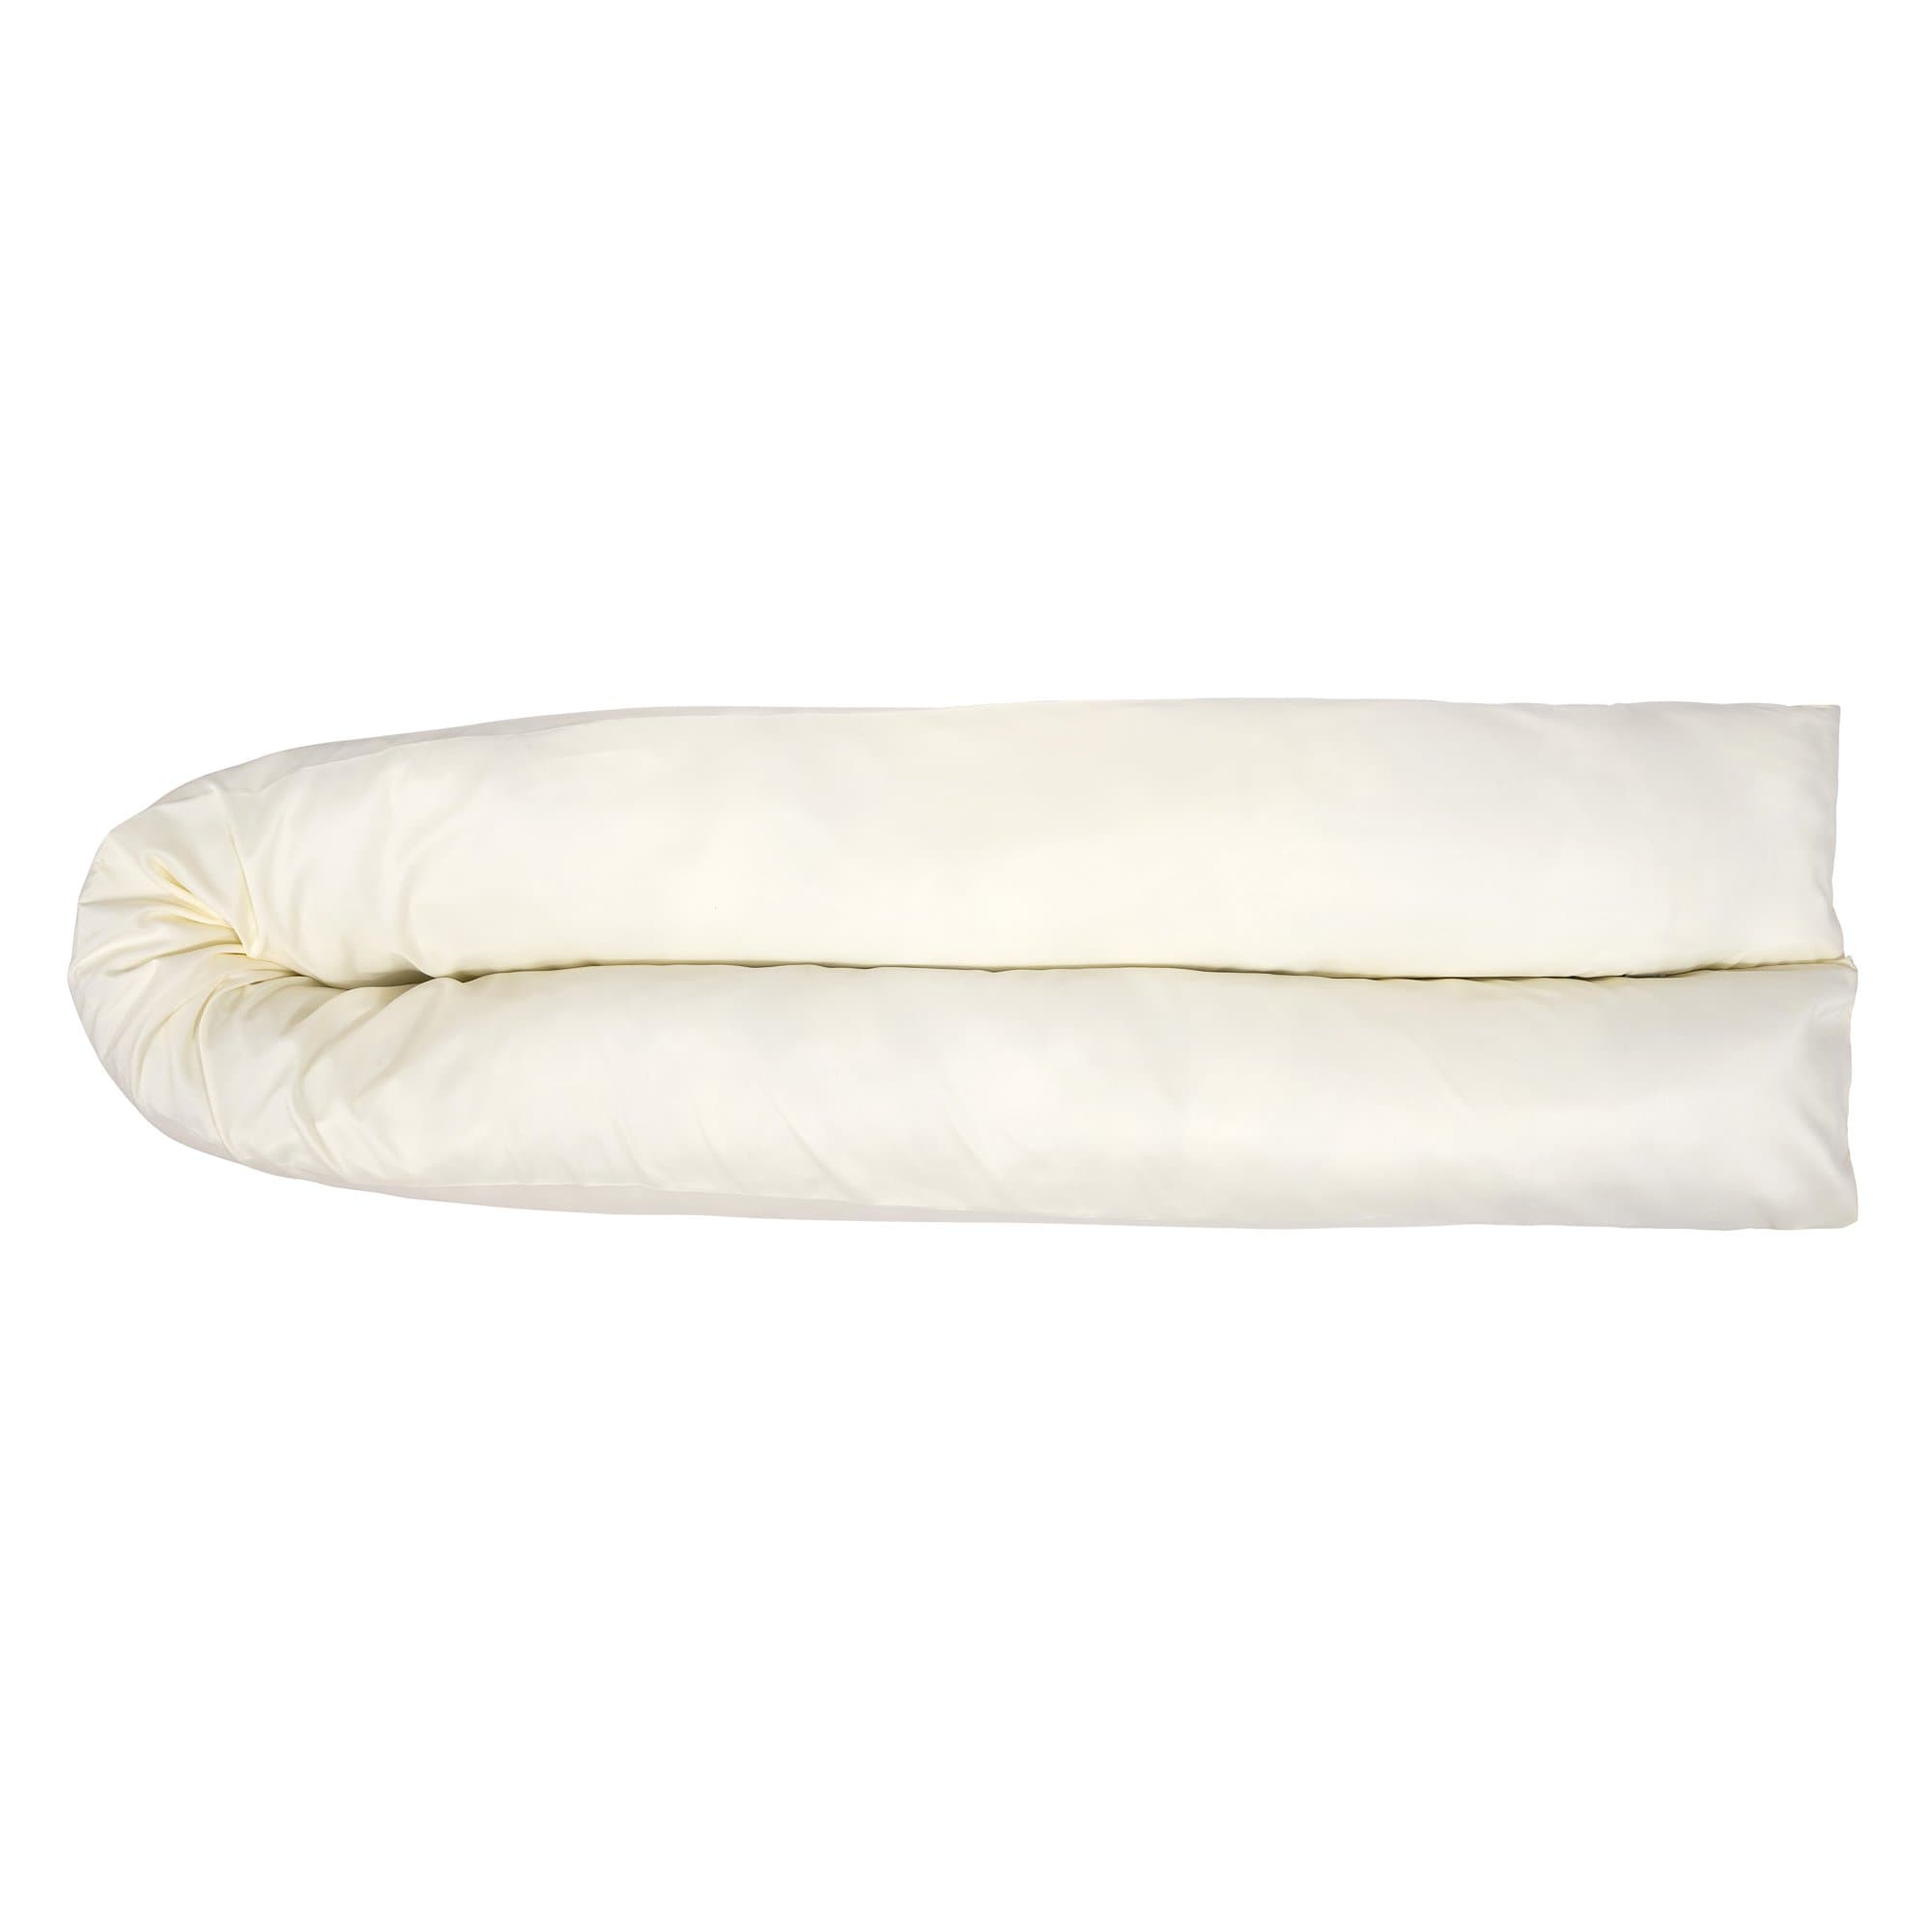 9 Ft Maternity Pillow And Case - Cream - For Your Little One